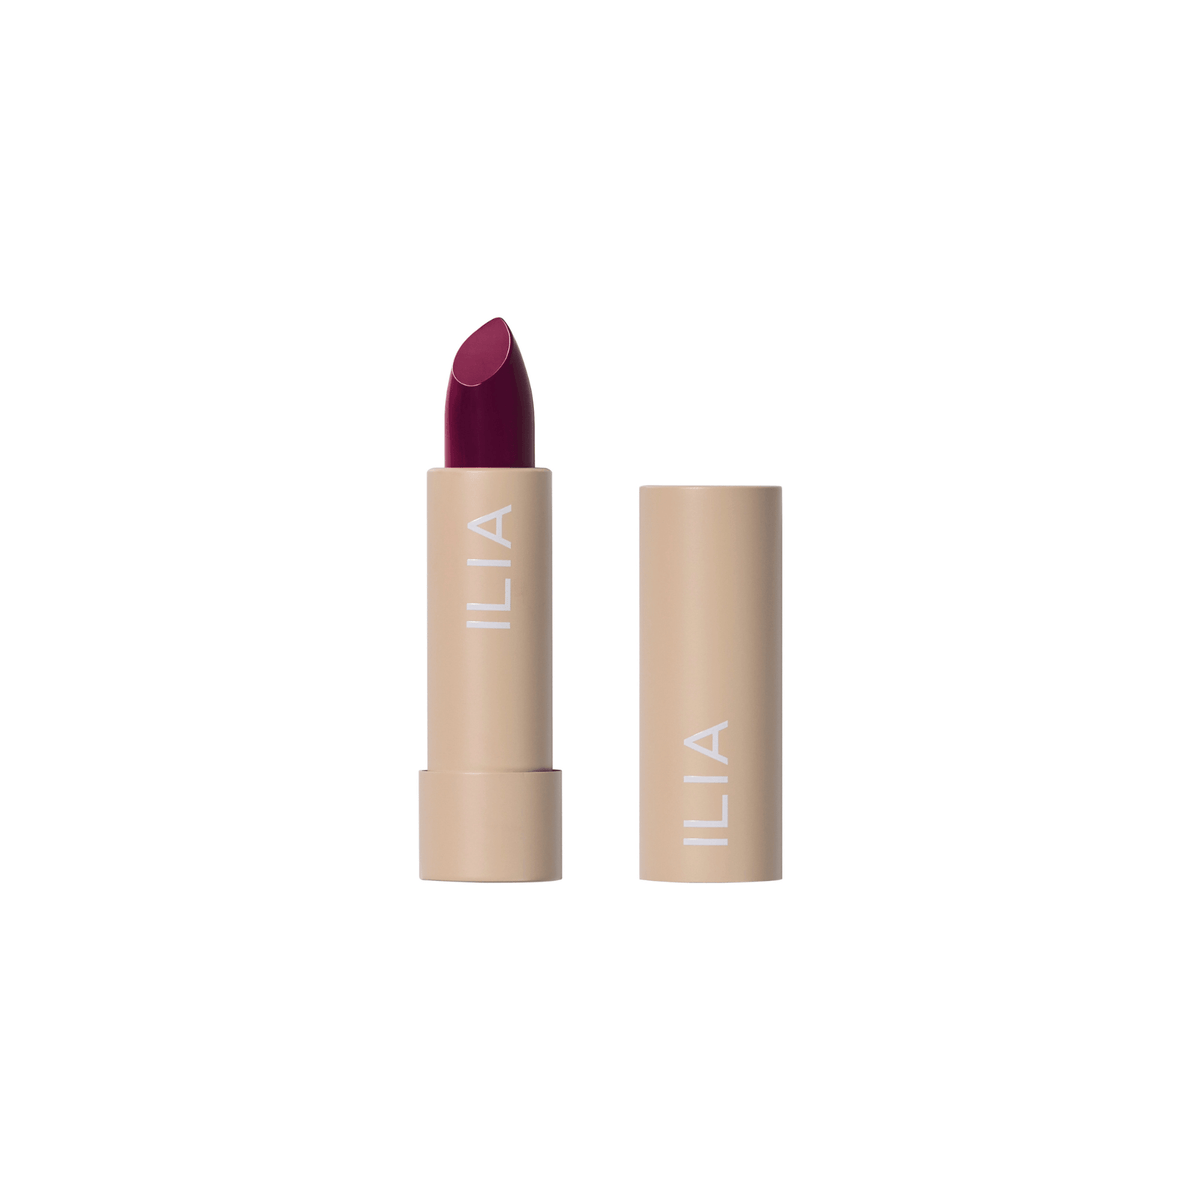 Primary Image of Color Block Lipstick in Ultra Violet